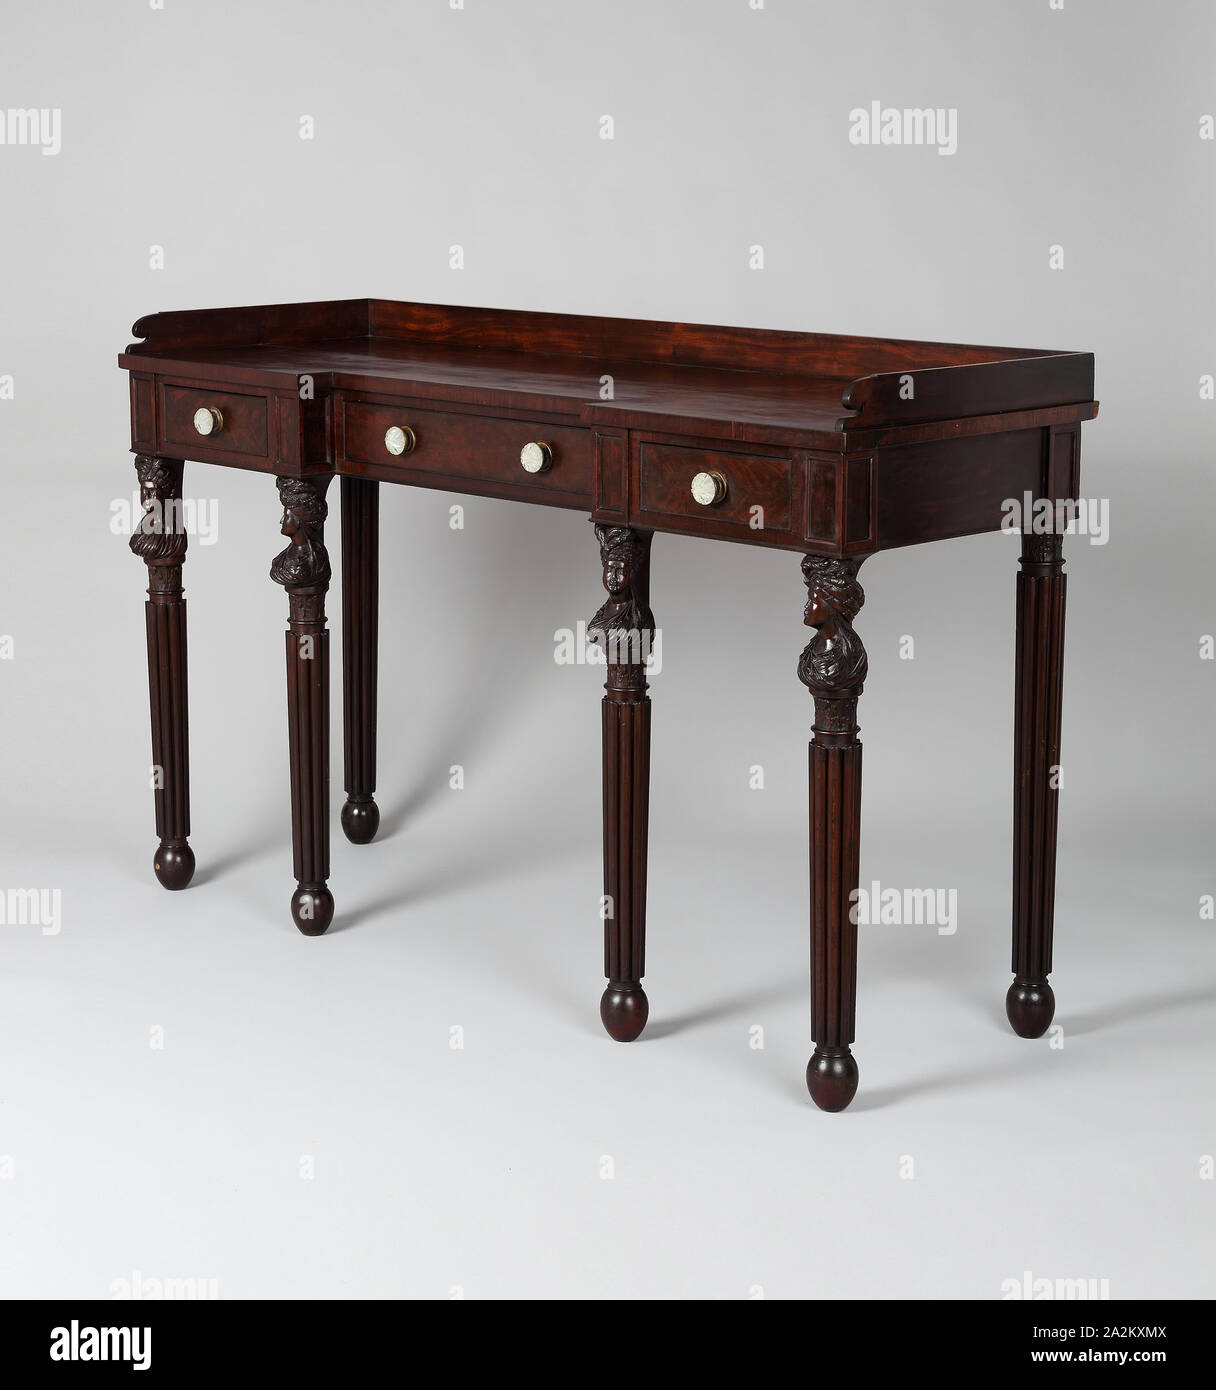 Sideboard, c. 1820, Attributed to Edward Priestley, American, 1778–1837, Baltimore, Baltimore, Mahogany, 114.3 × 186.7 × 64.8 cm (45 × 73 1/2 × 25 1/2 in Stock Photo